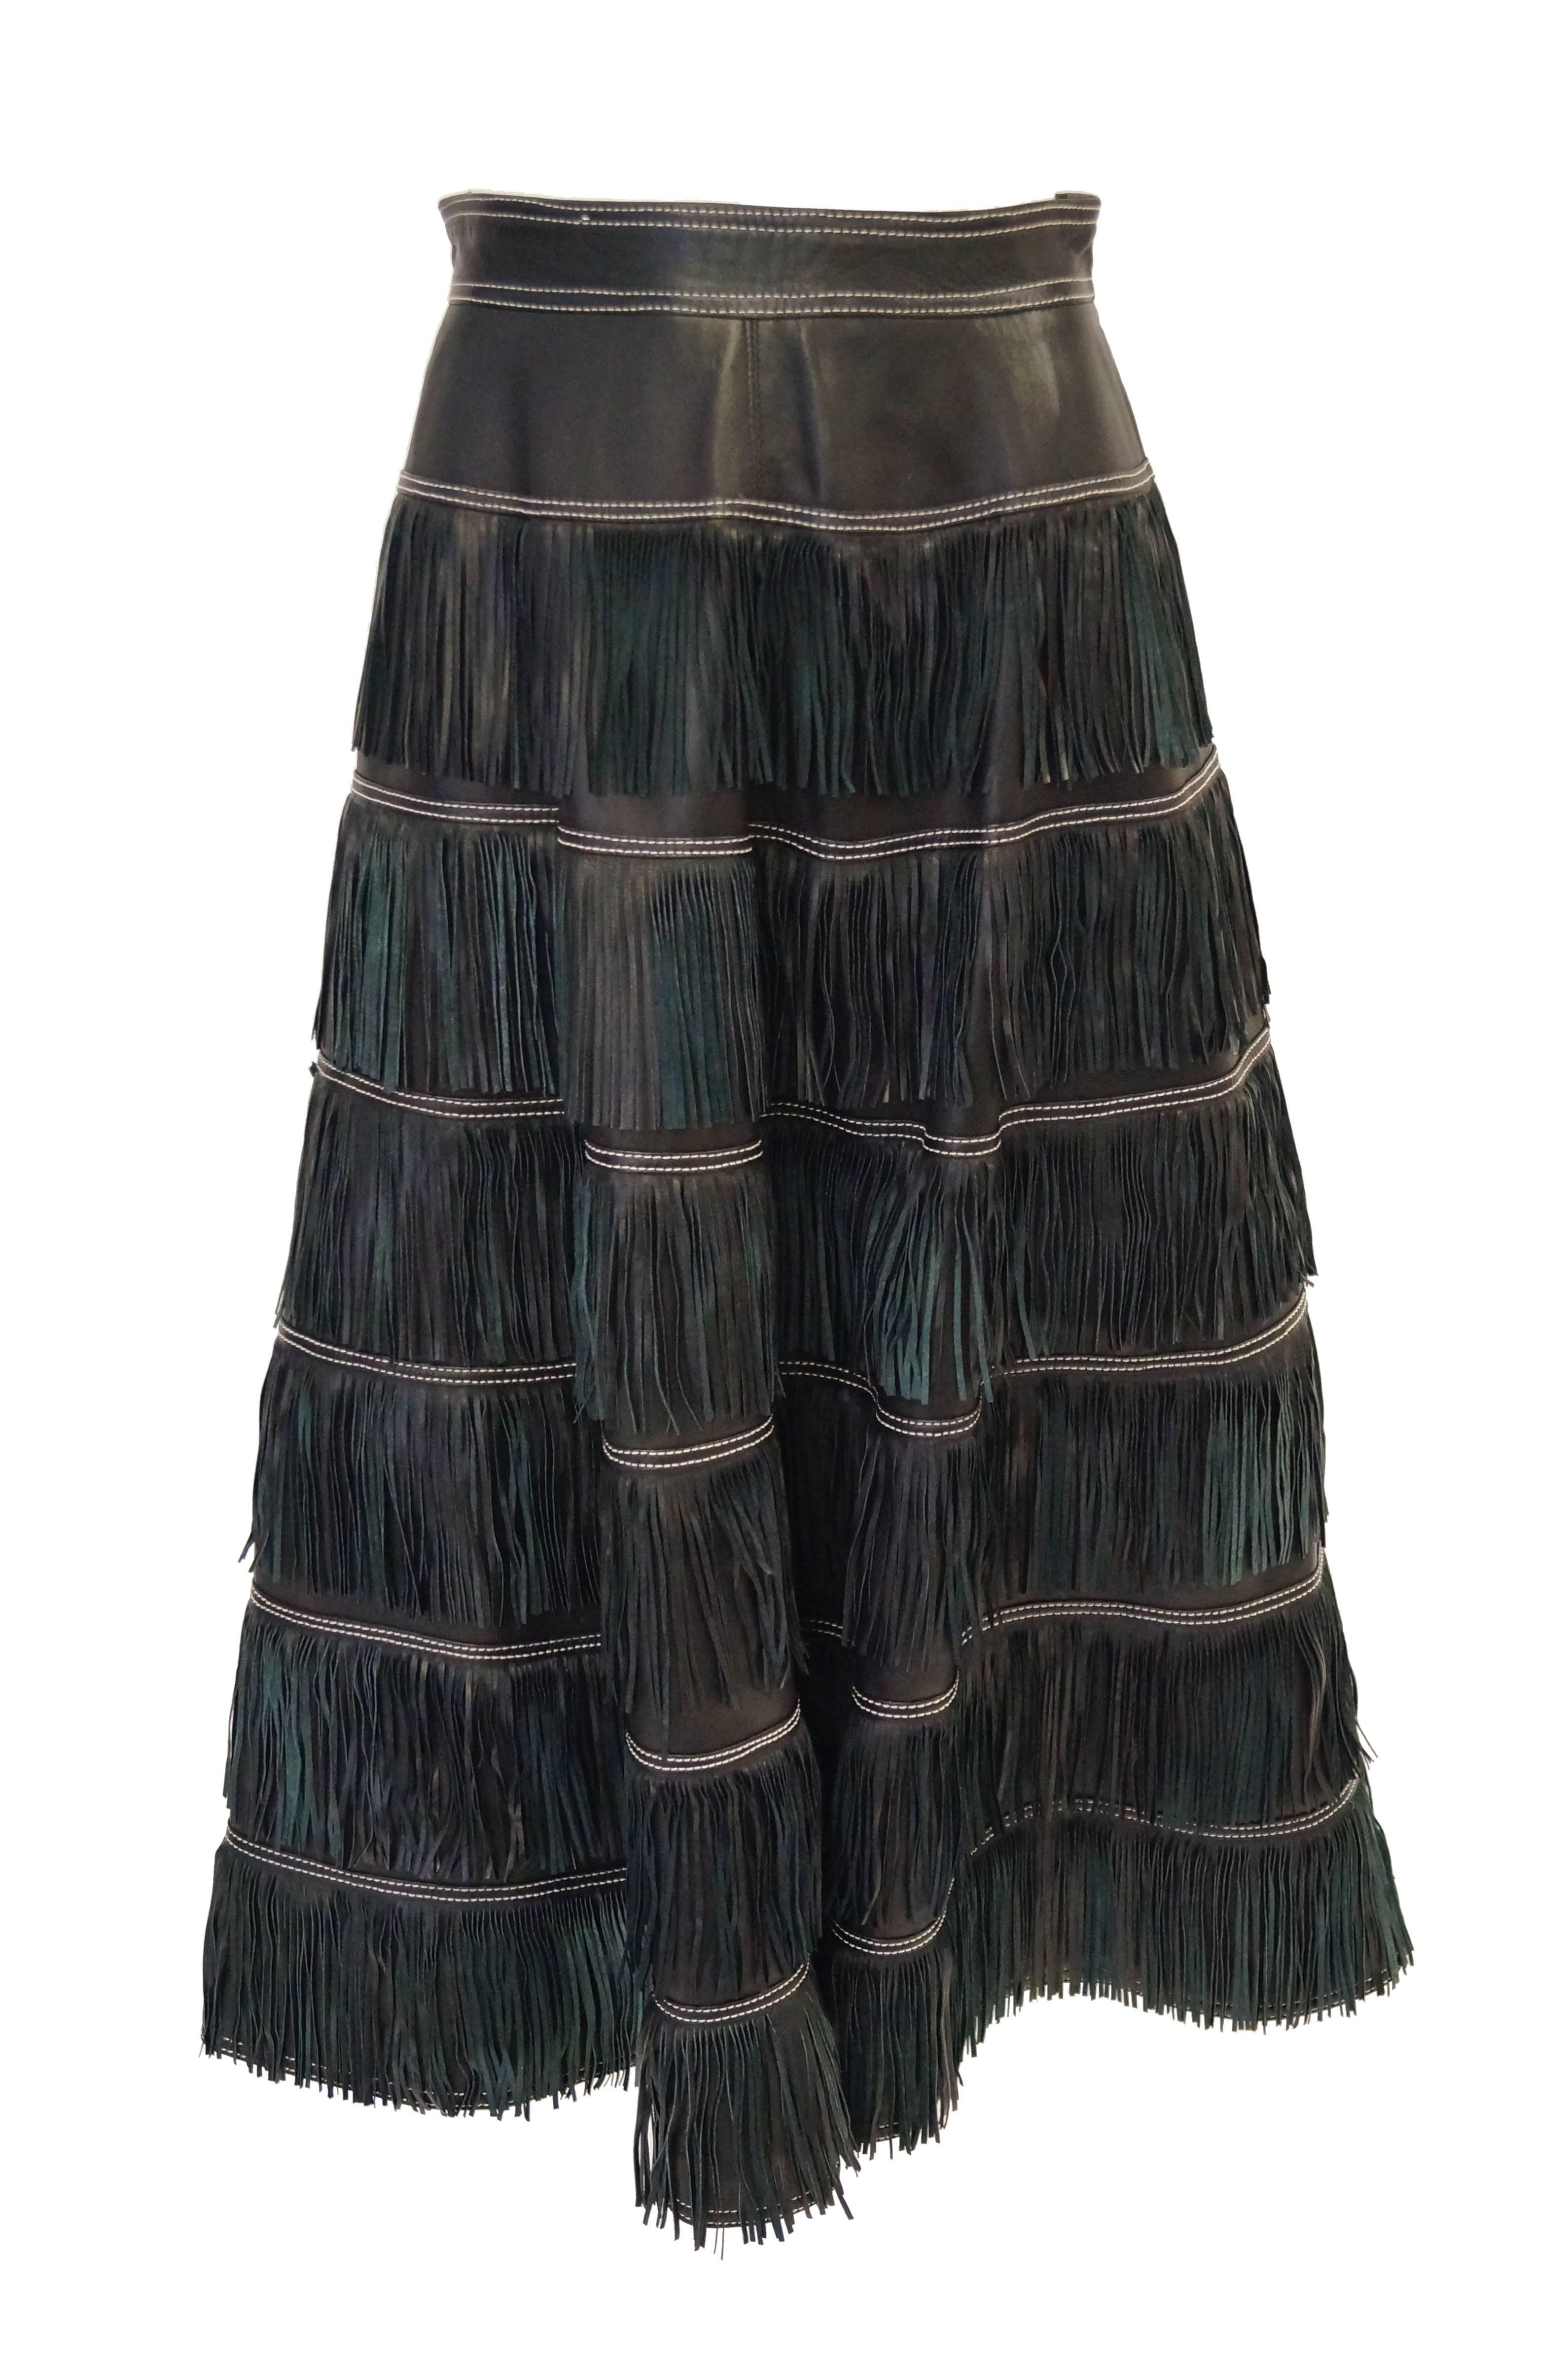 Amazing leather fringe skirt by Gianni Versace! The skirt is midi length, sits at the natural waist, and has five layers of fringe! The skirt features cream accent stitching along the waist and between each layer of fringe. Flashes of dark